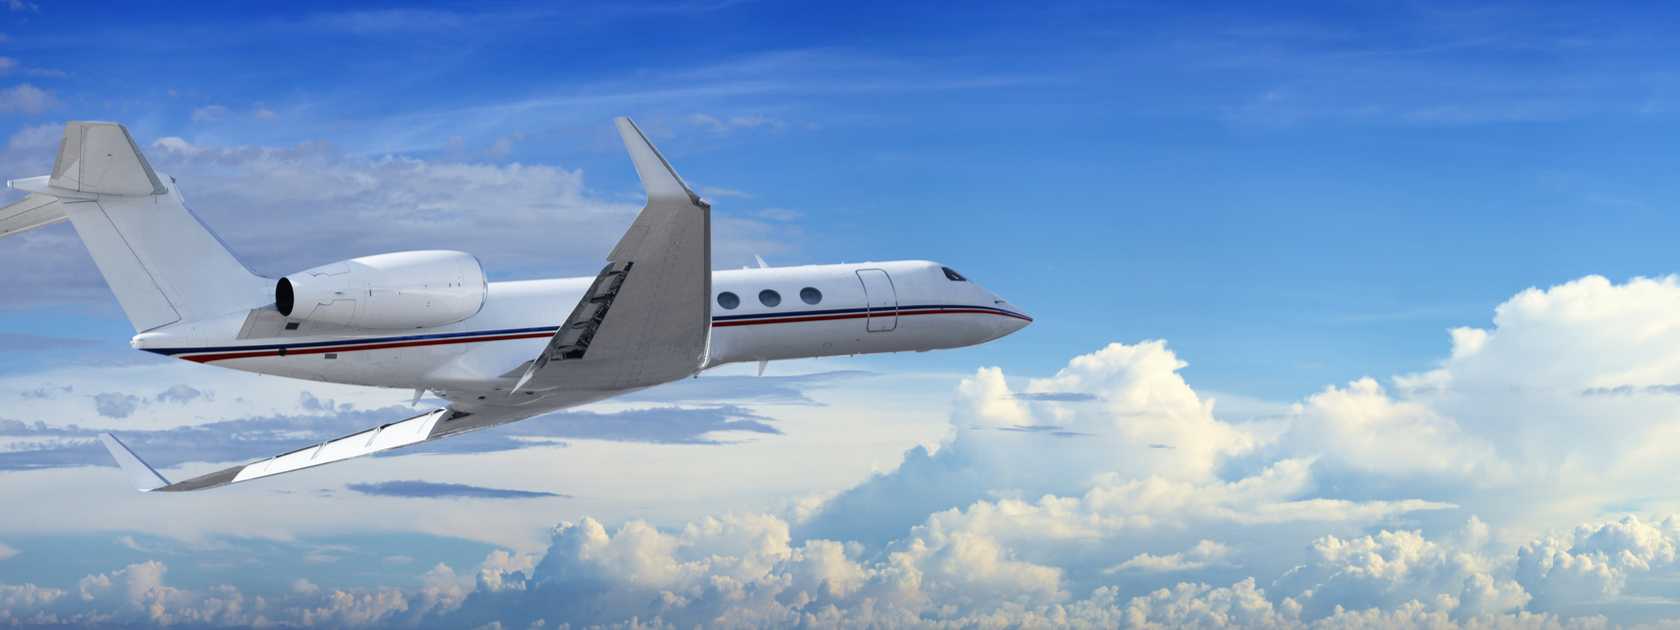 The Real Advantages of Private Jets